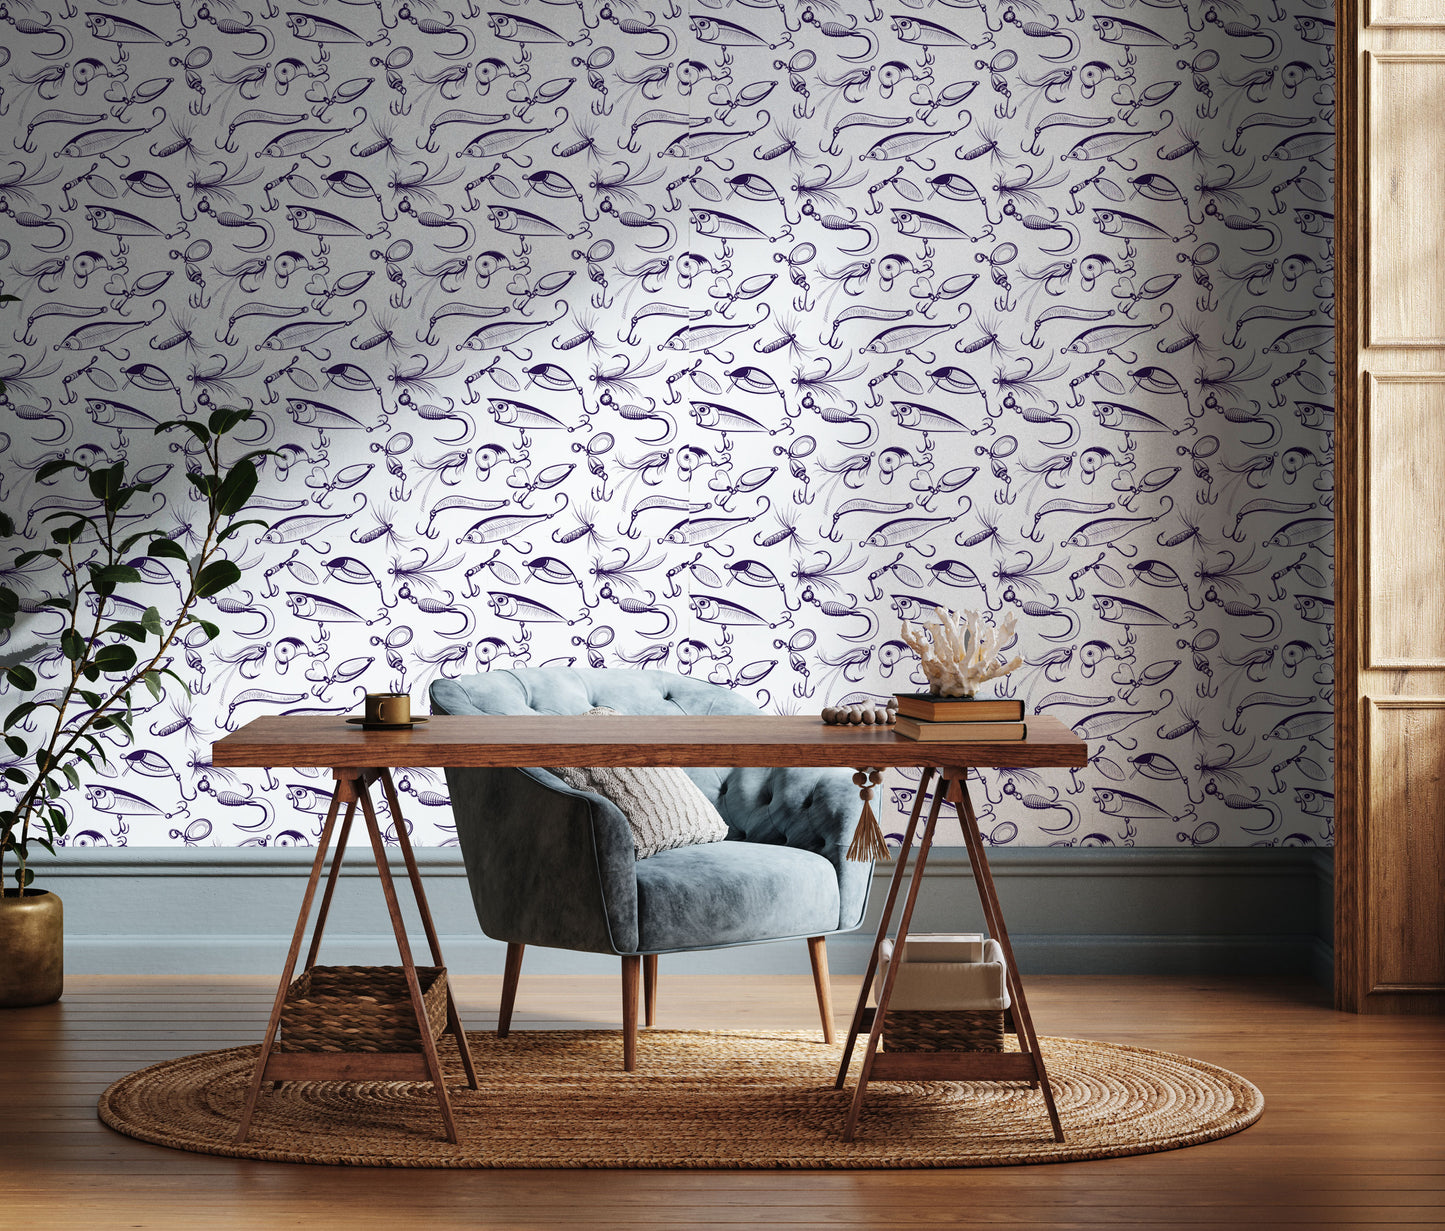 Fishing lure removable peel and stick wallpaper Nautical wallpaper